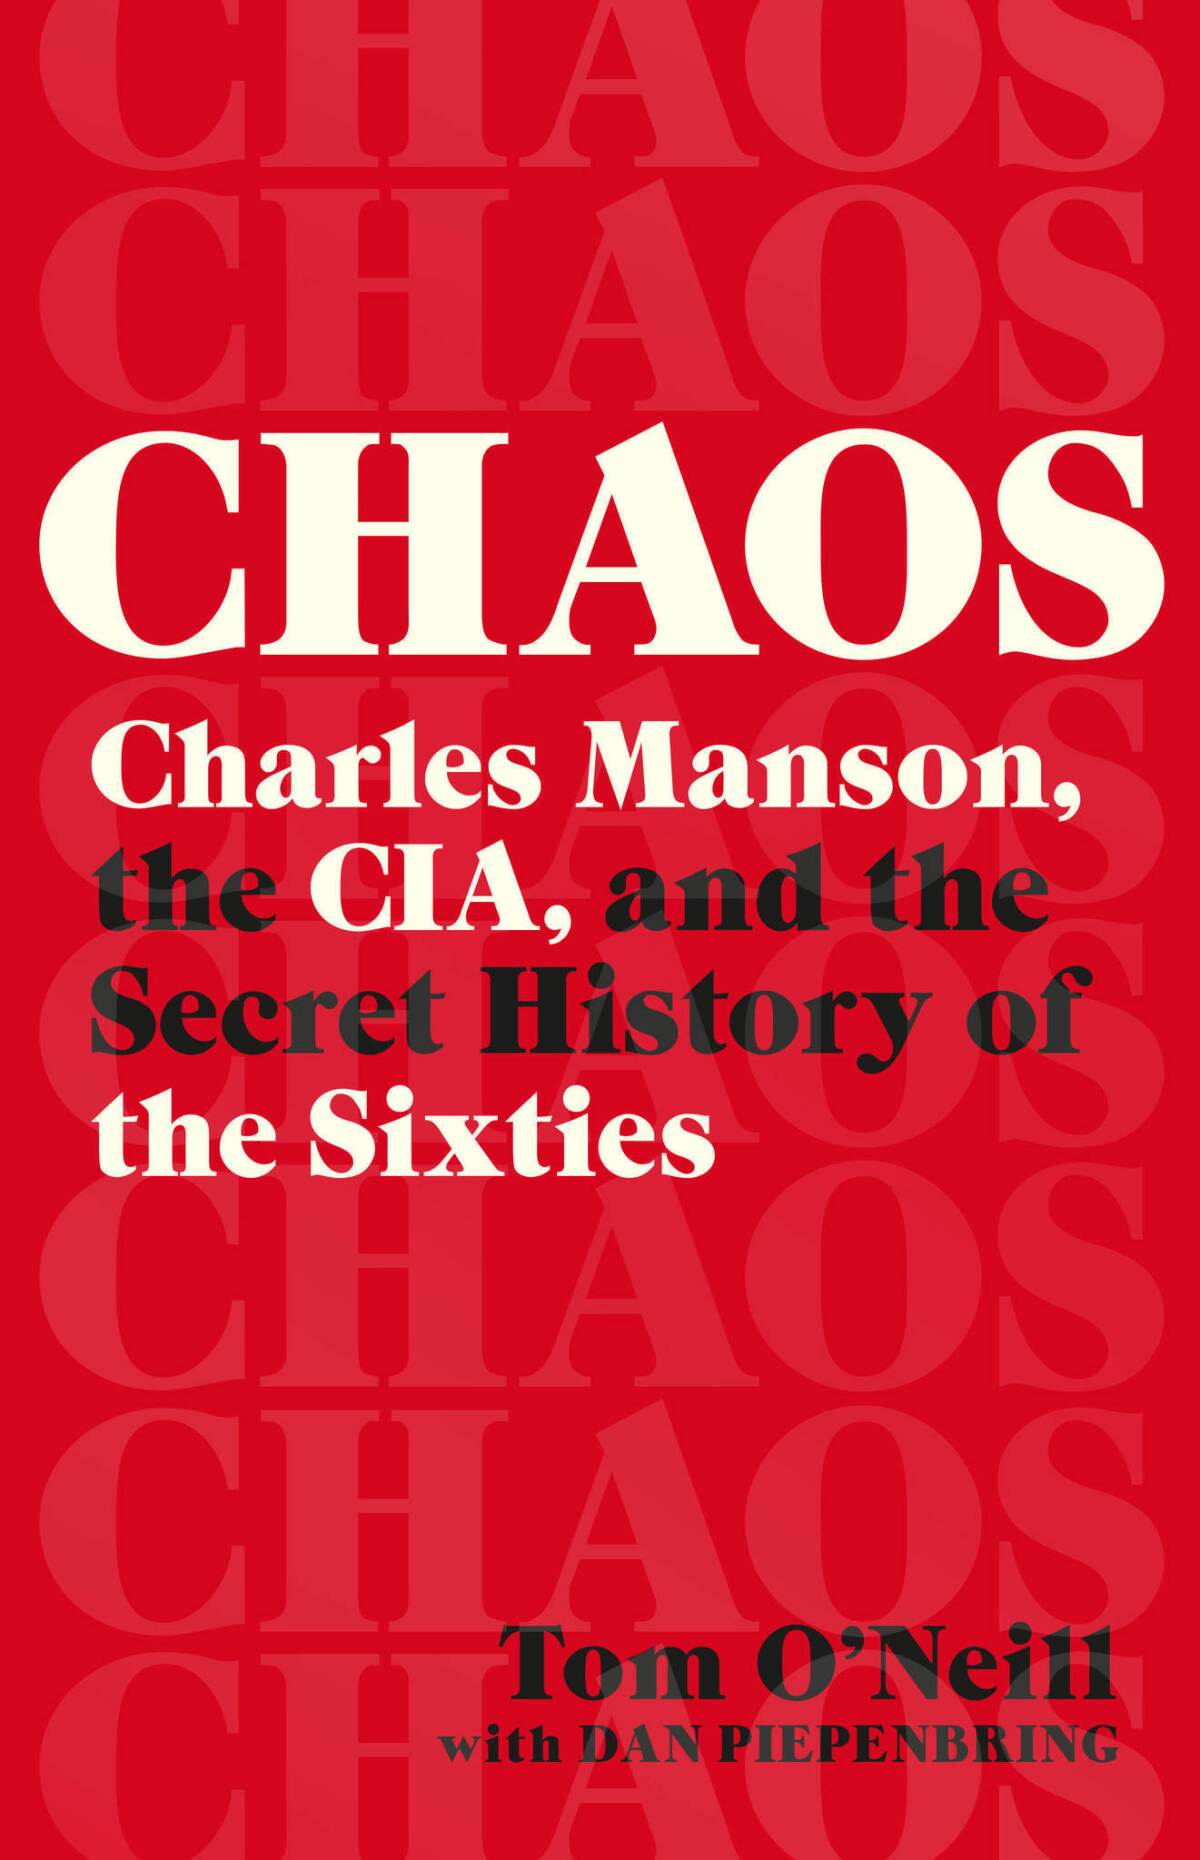 A book jacket for "Chaos: Charles Manson, the CIA, and the Secret History of the Sixties."